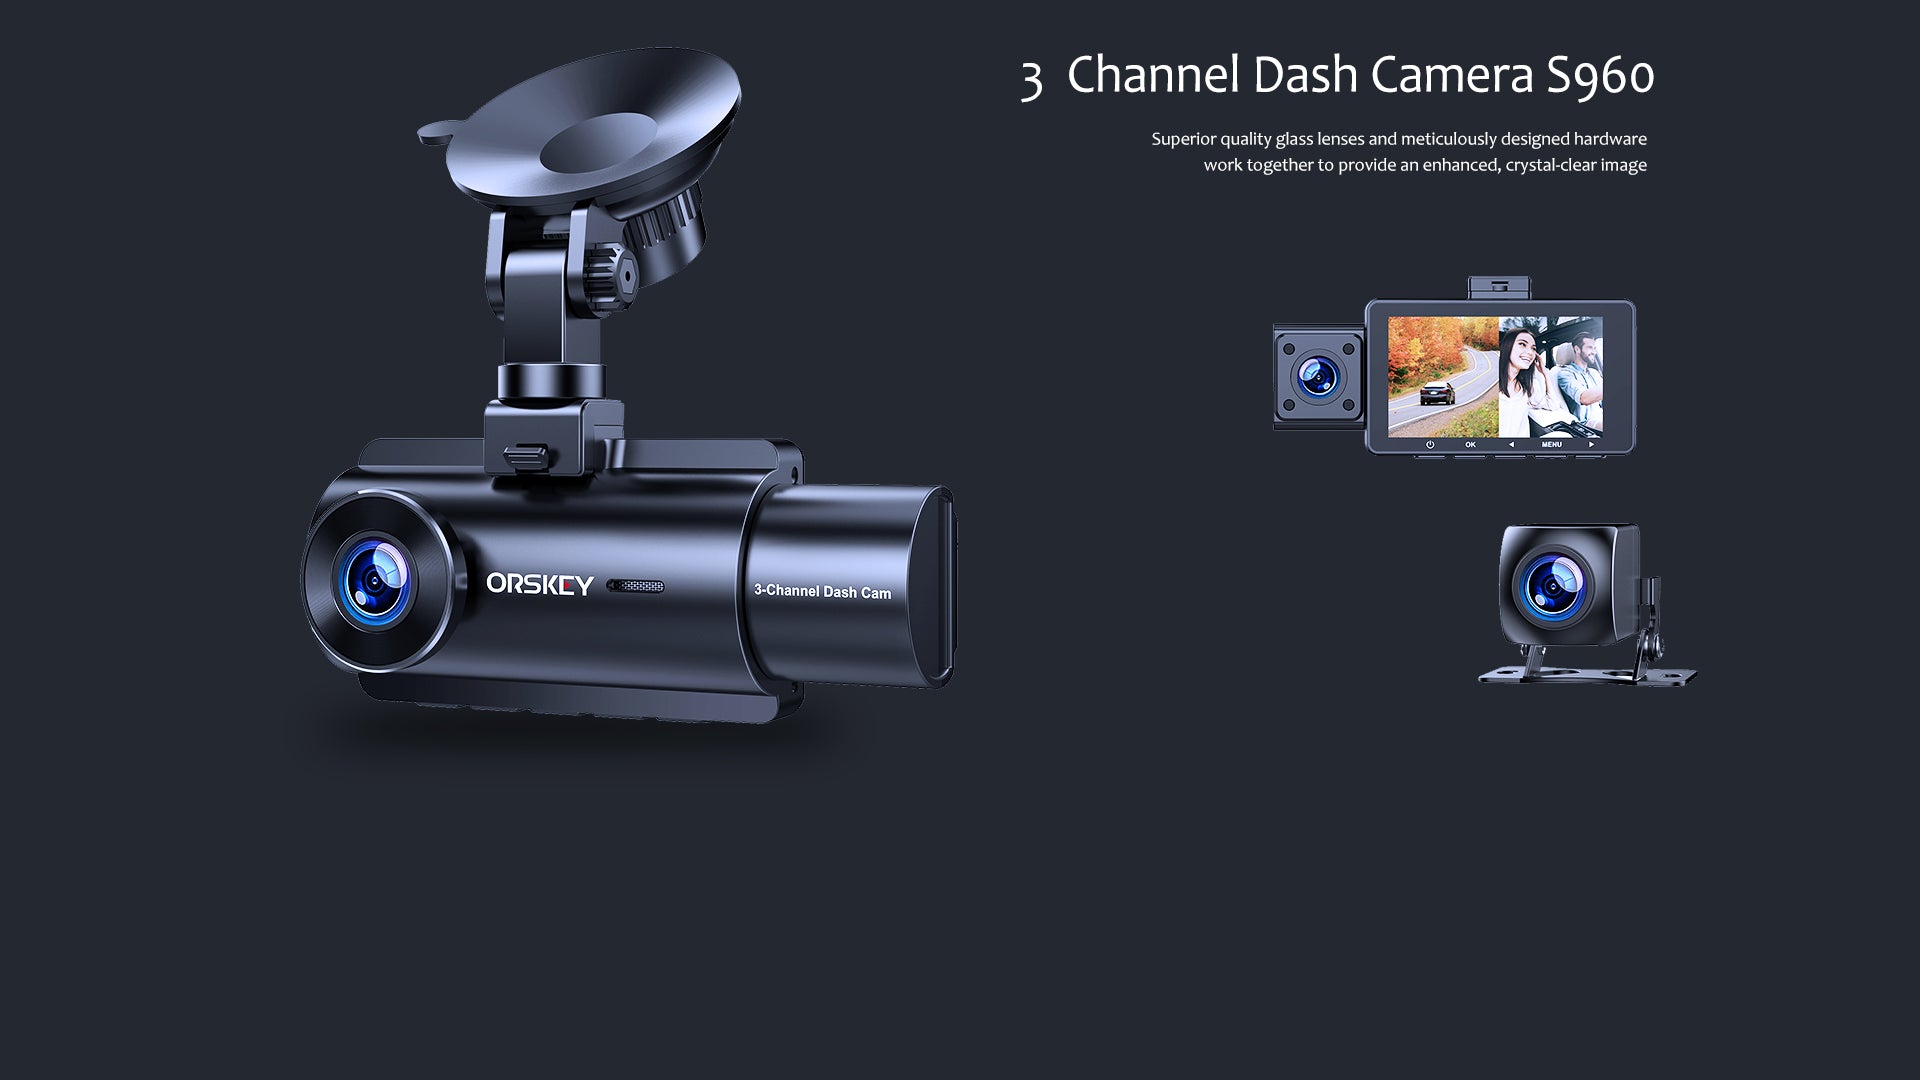 2 Channel Dash Cam Front and Inside,3.0 inch IPS Screen,Built in